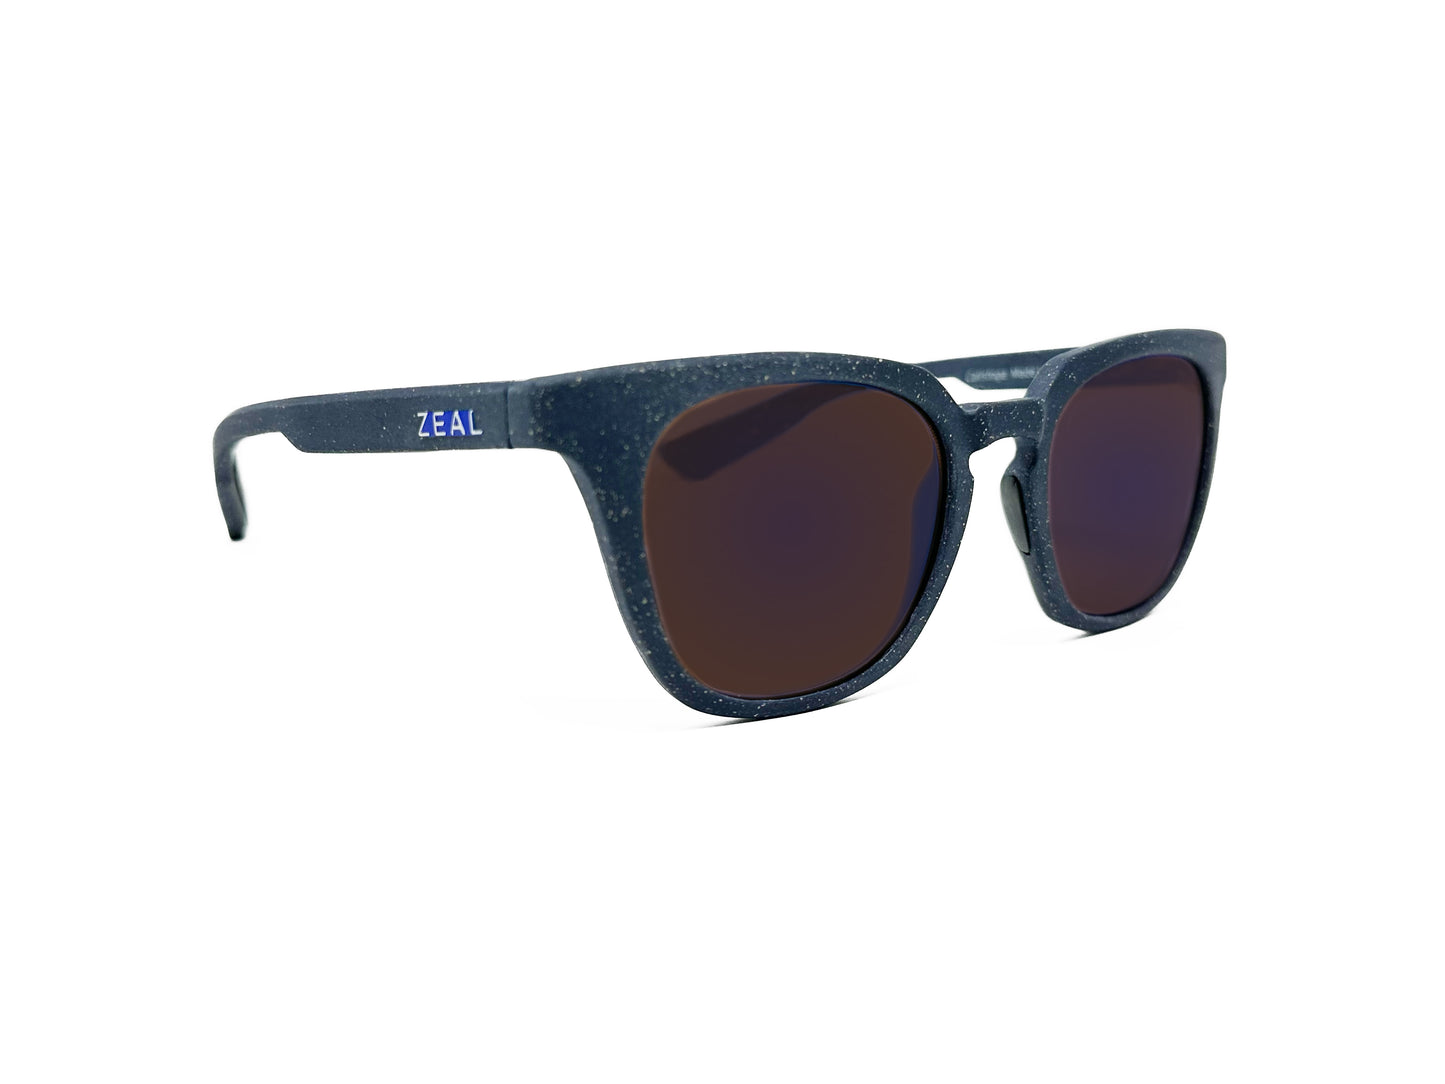 Zeal Optics tall, wayfarer style, polarized sunglass with keyhole bridge. Model: Calistoga. Color: 12027 - Navy blue with white speckles. Side view.